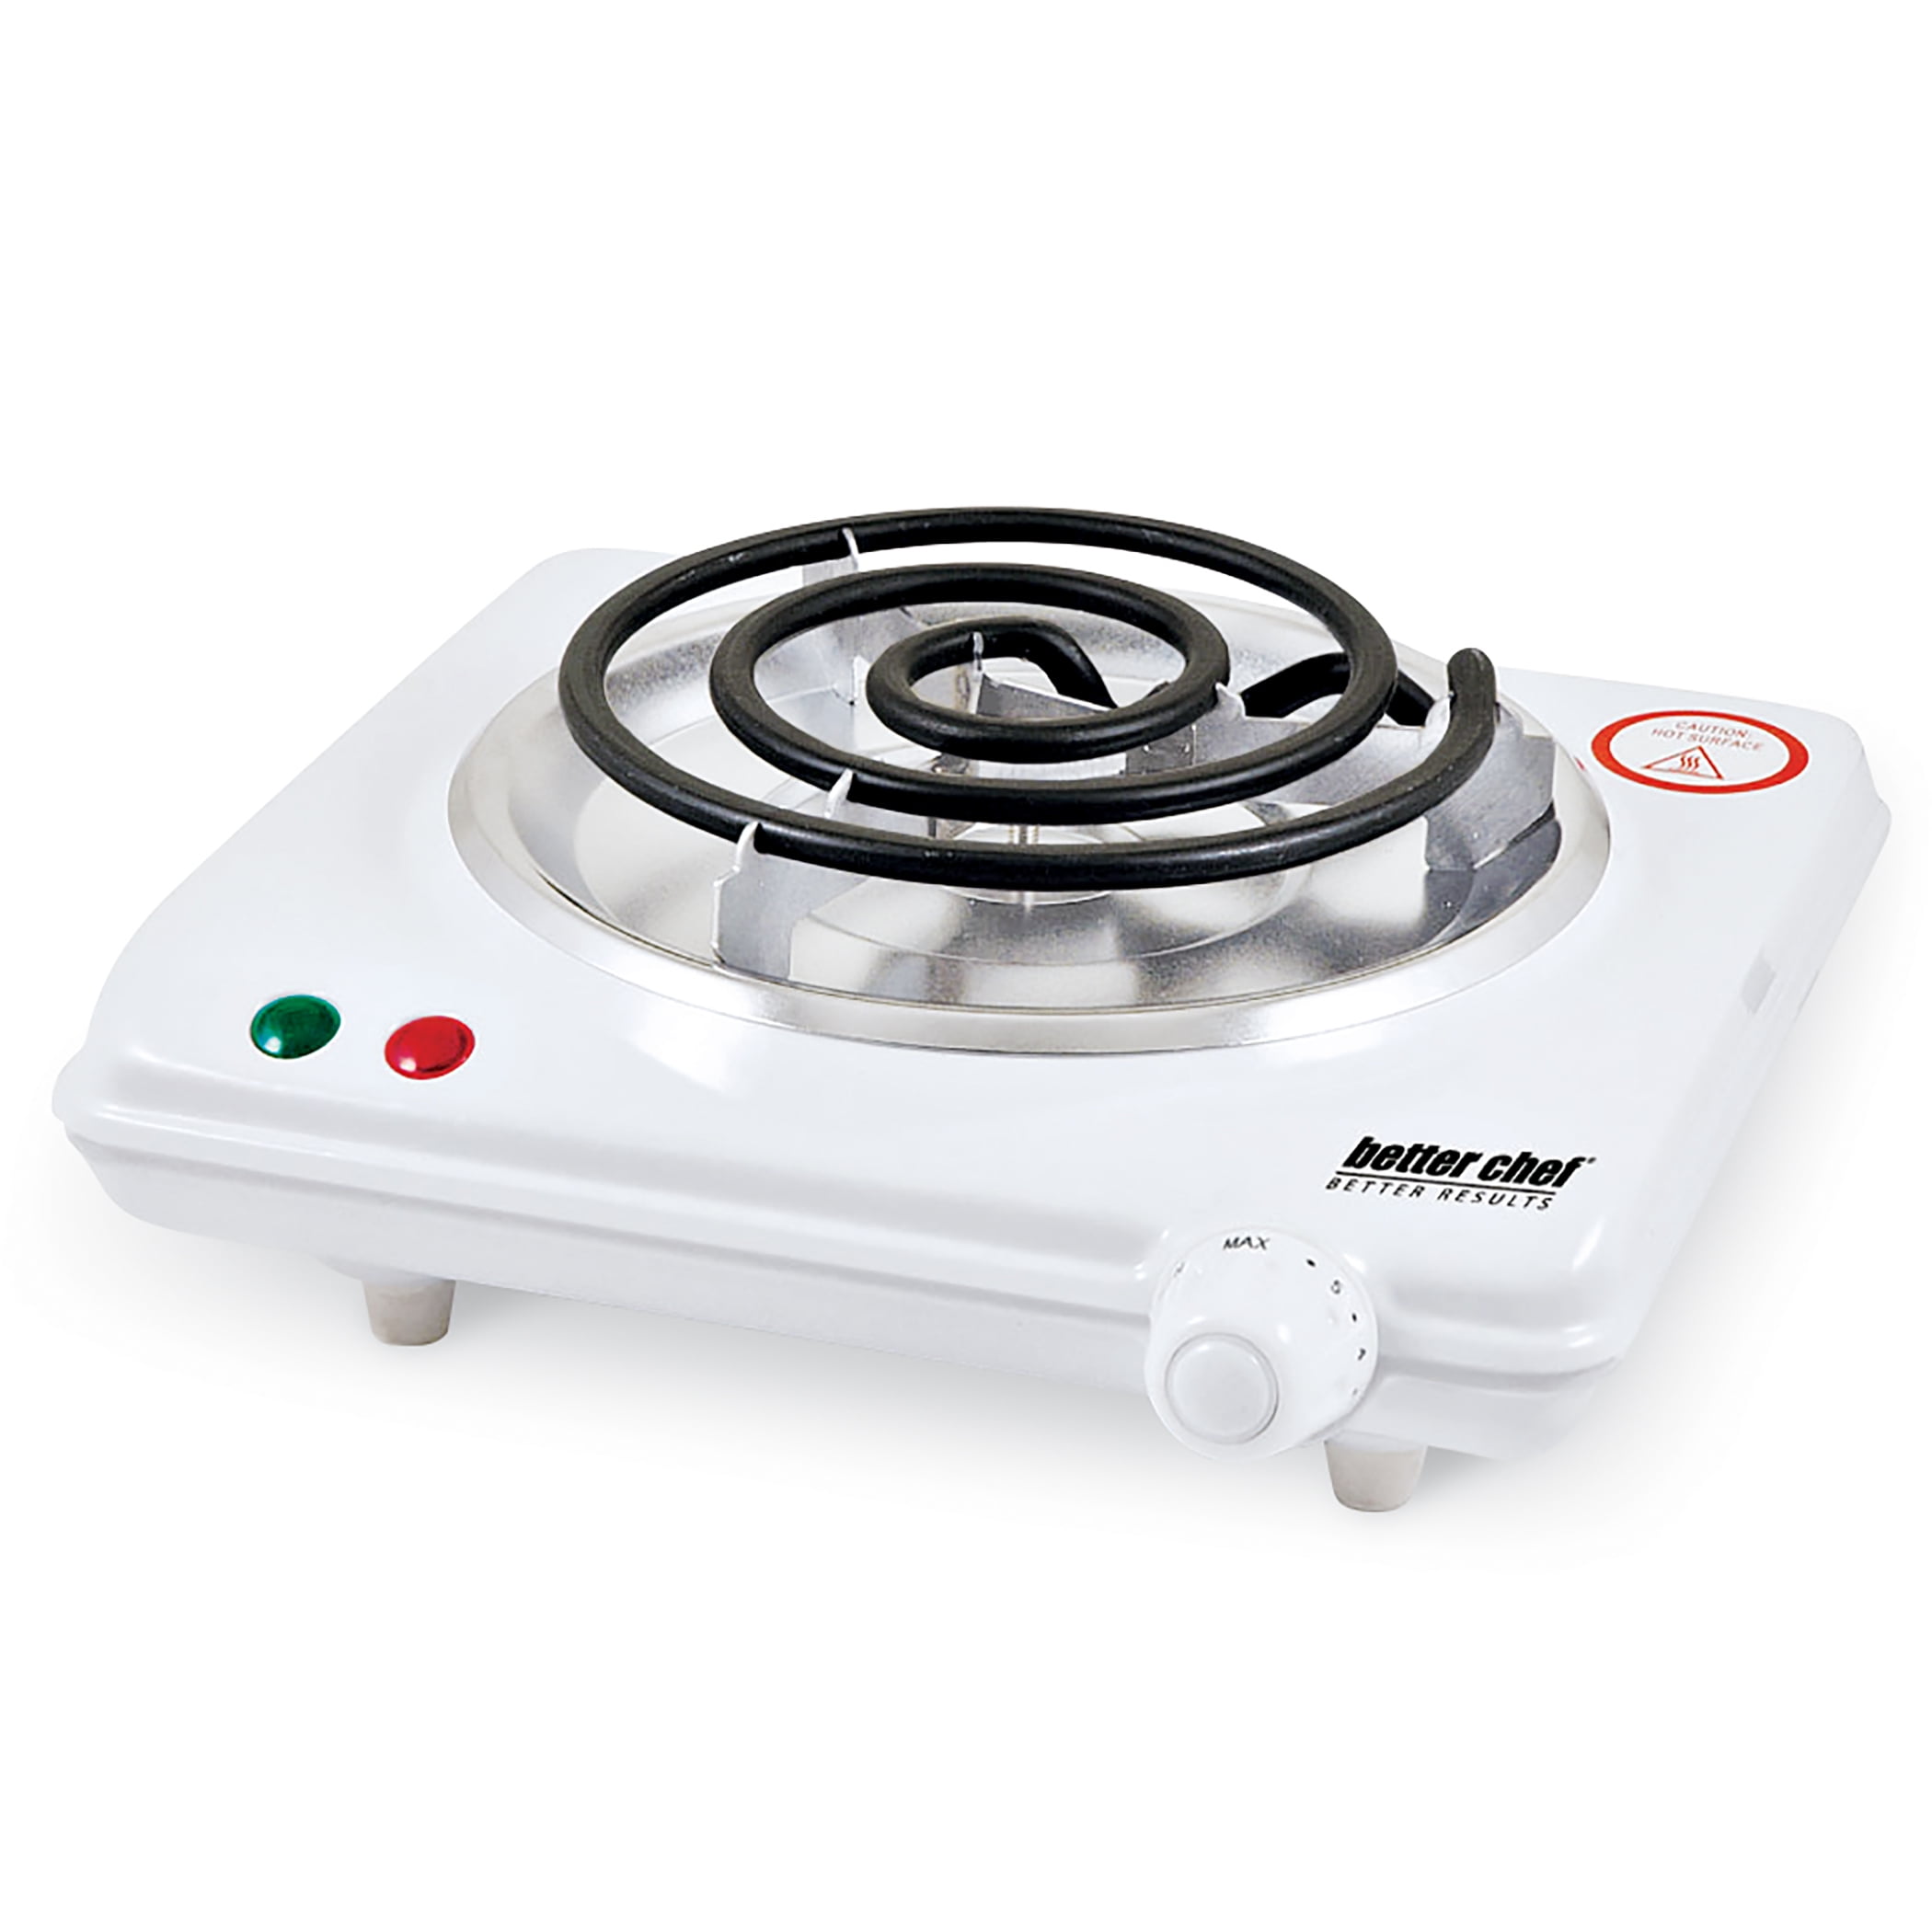 Mini Electric Stove Review - Powerful Single Electric Burner